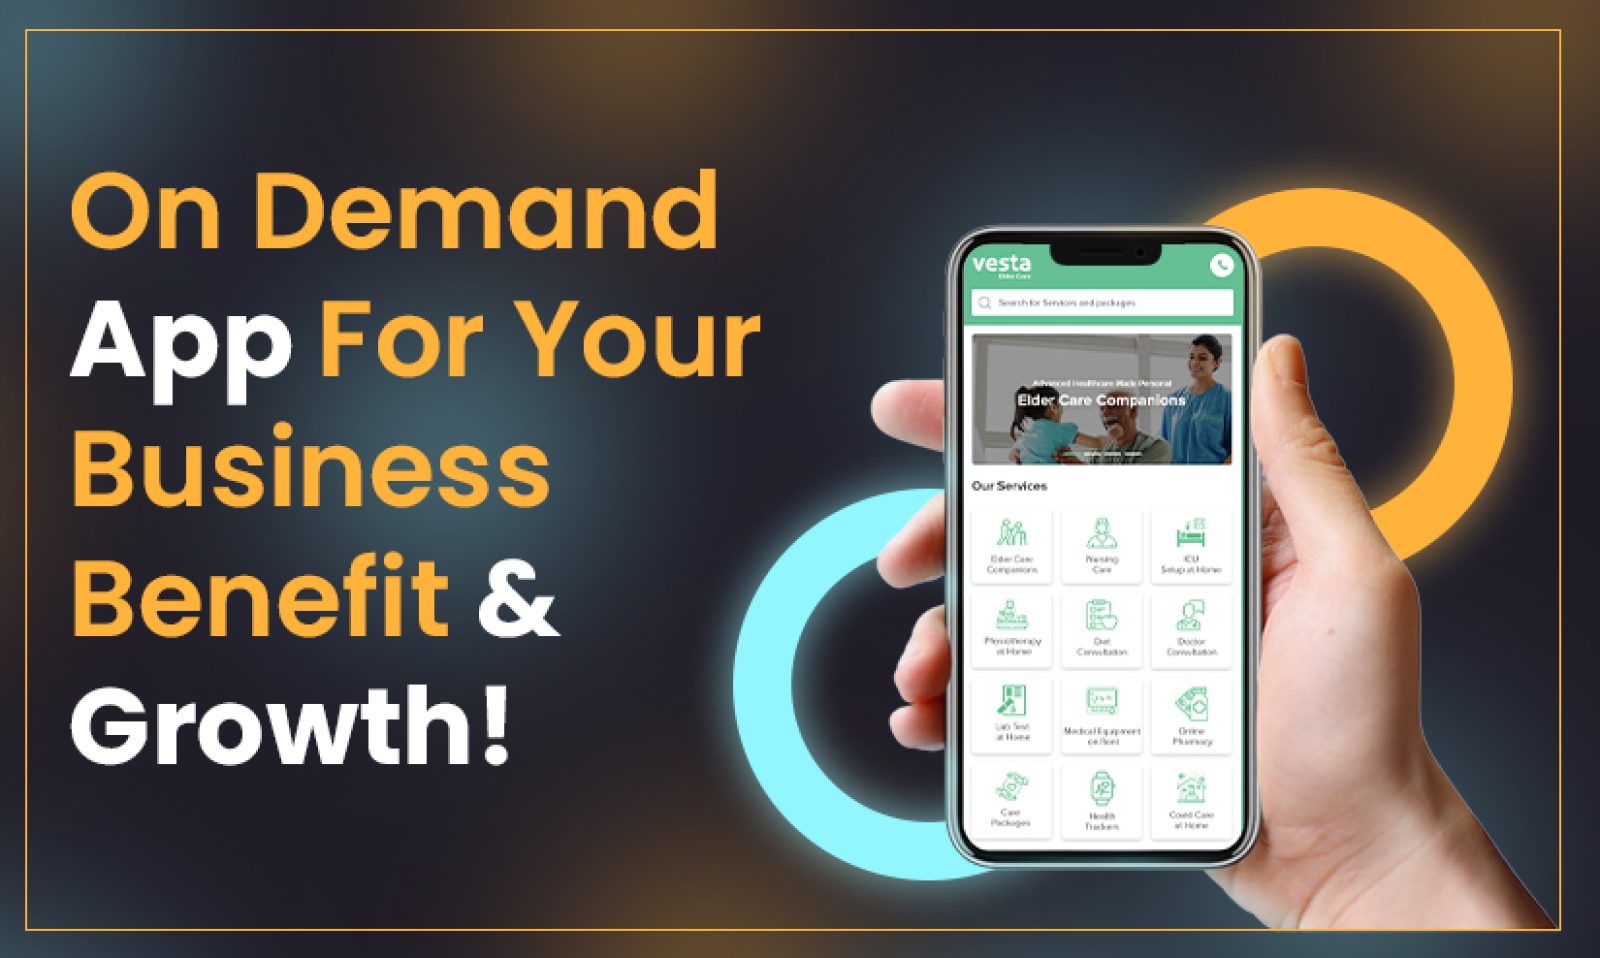 On Demand App For Your Business Benefit & Growth!